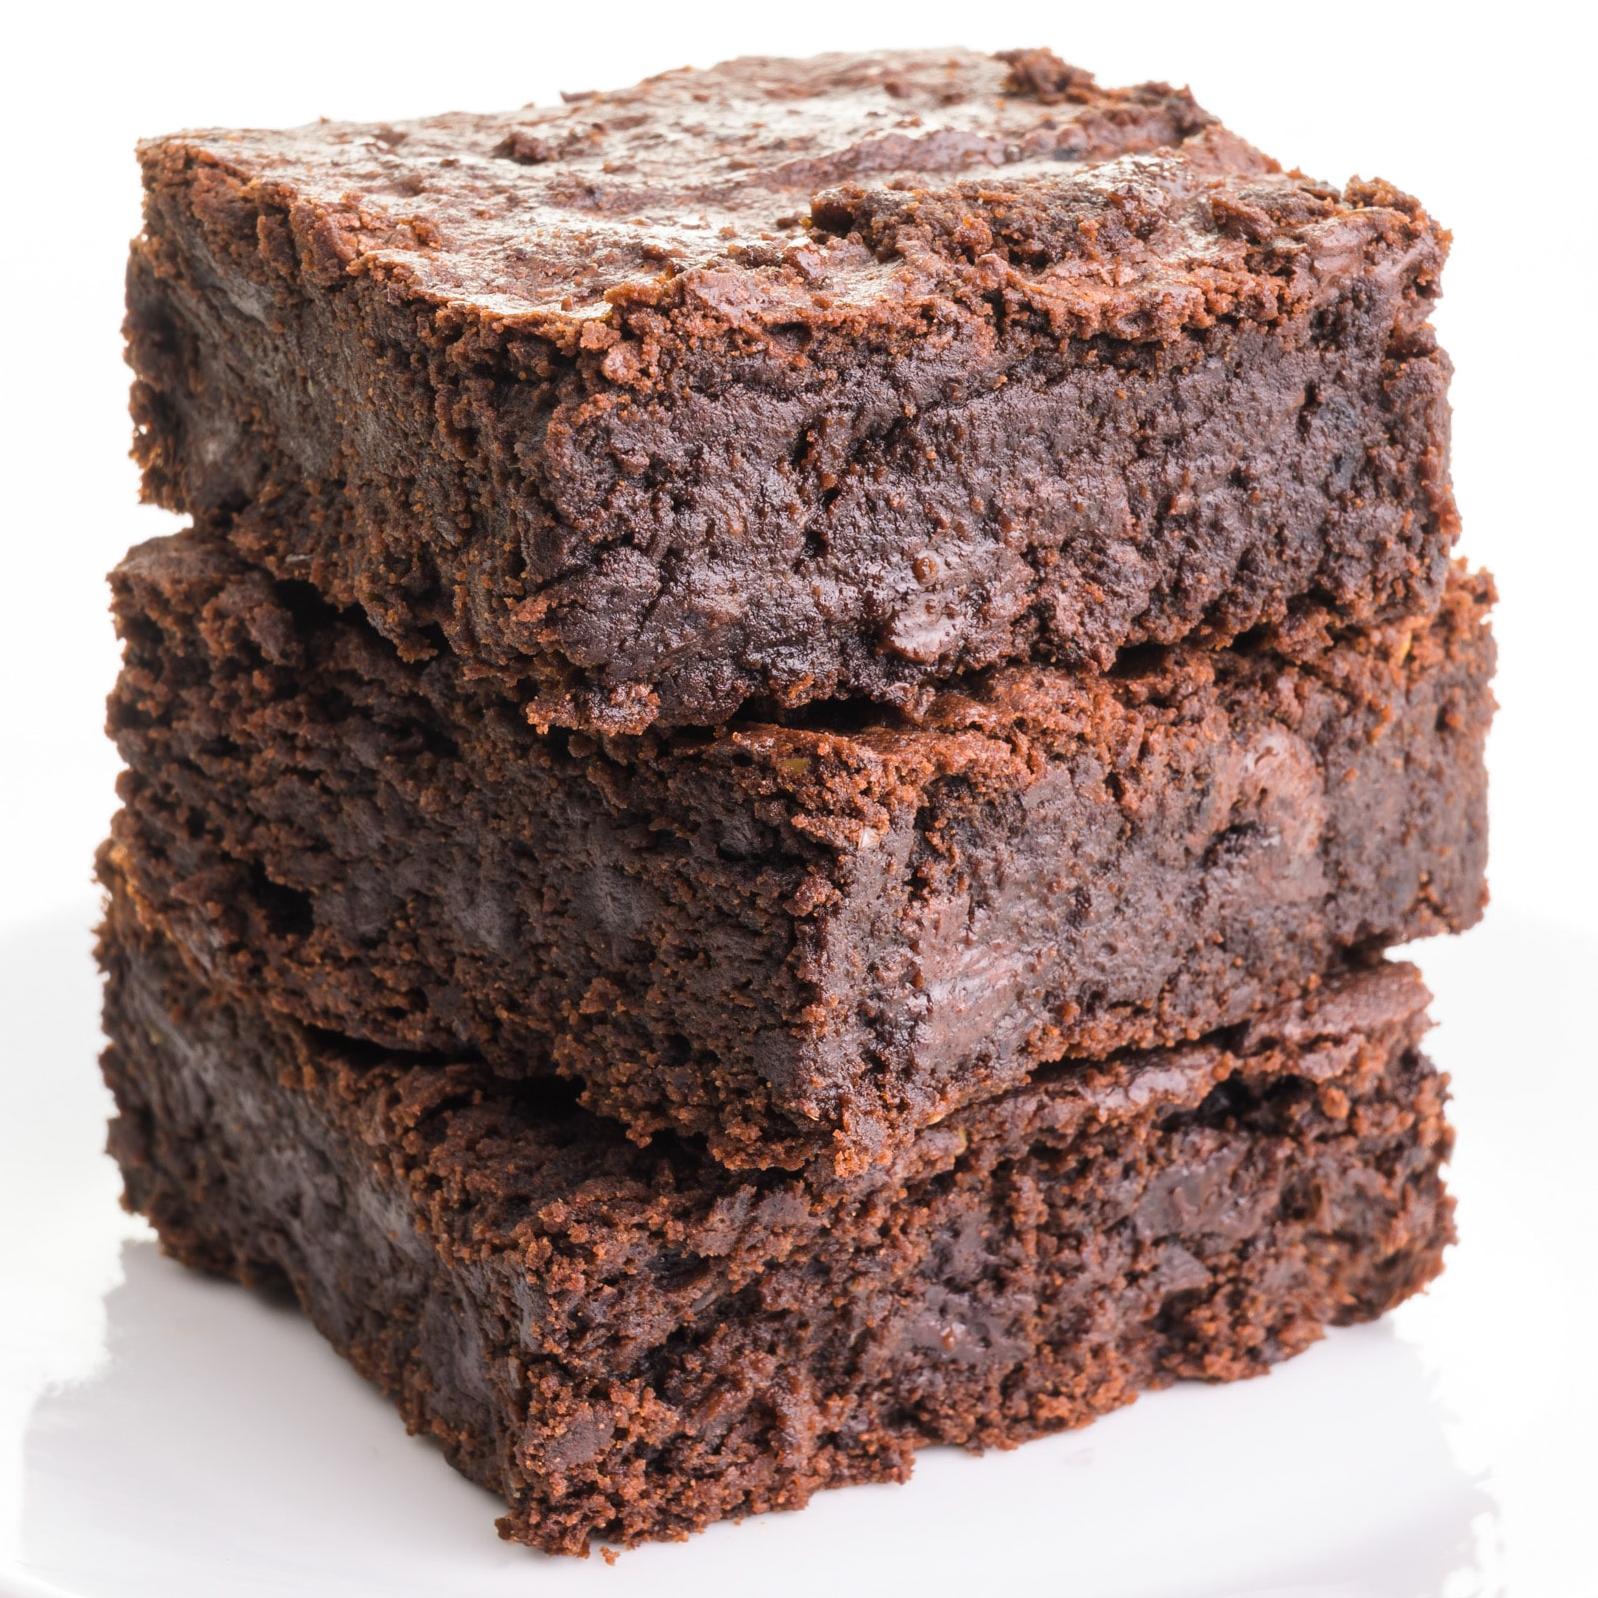  Indulge in guilt-free chocolatey goodness with these Vegan Black Bean Brownies!